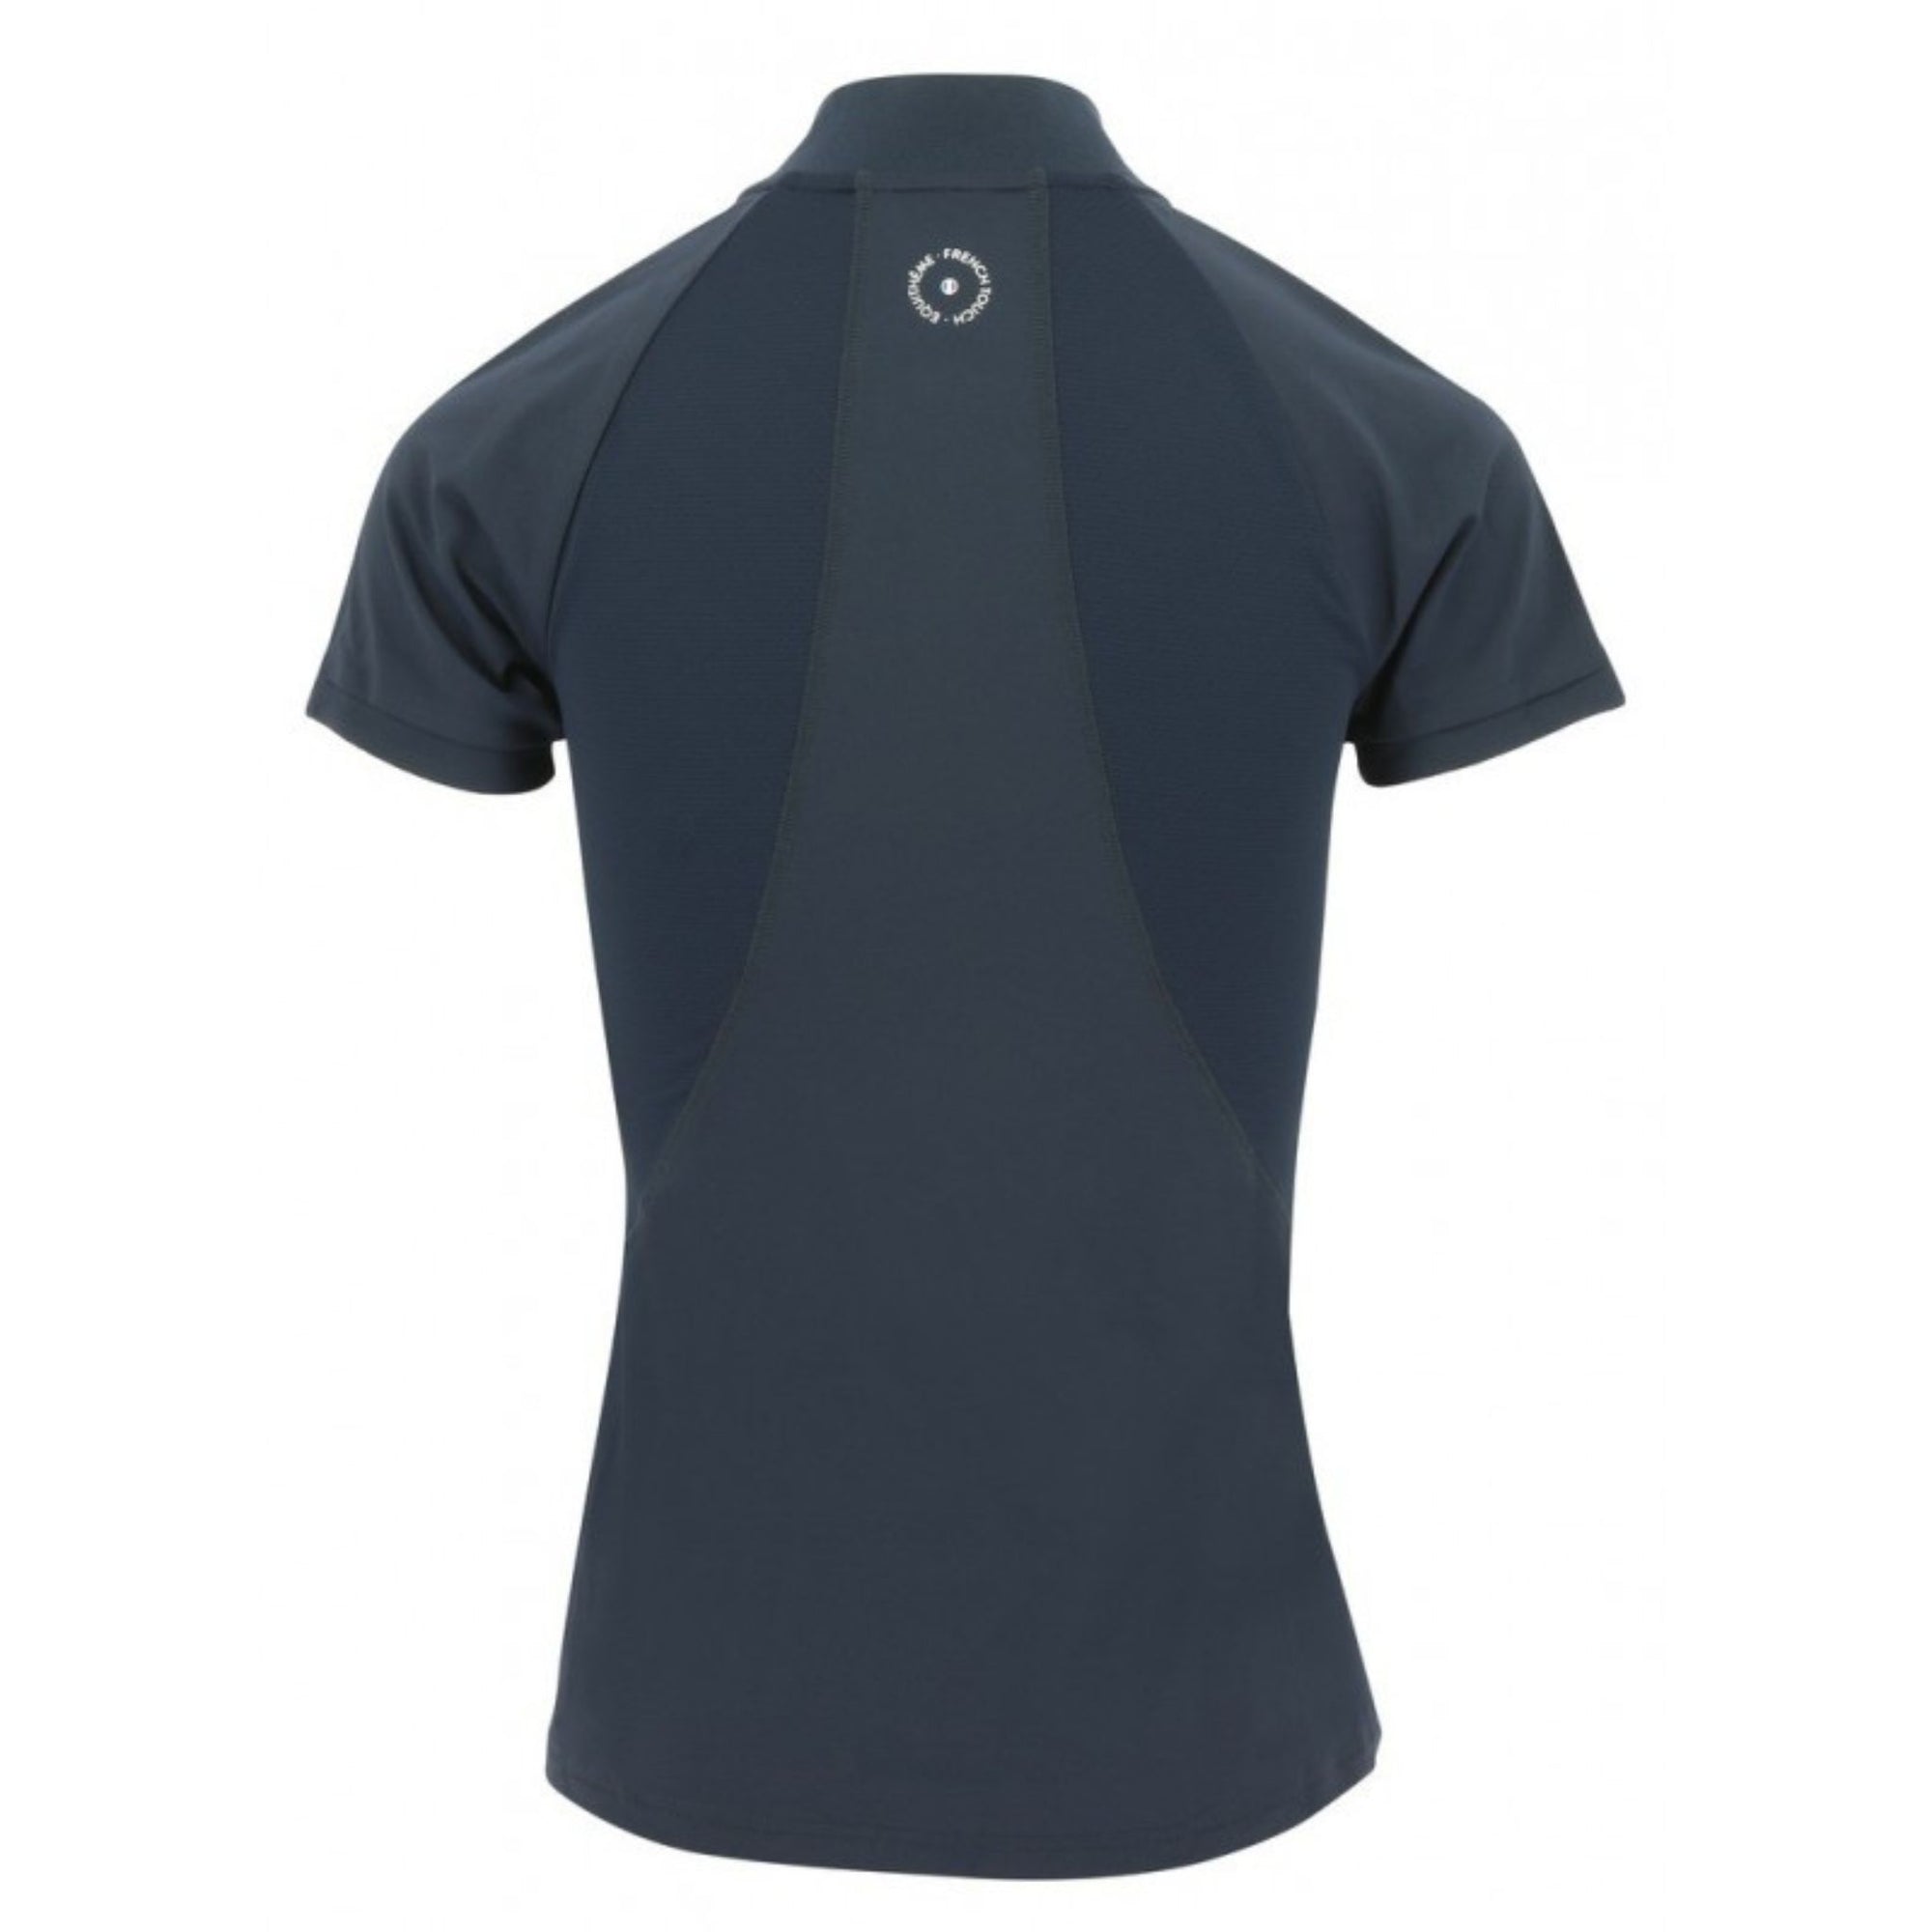 Navy zip polo with Equitheme logo on the left shoulder